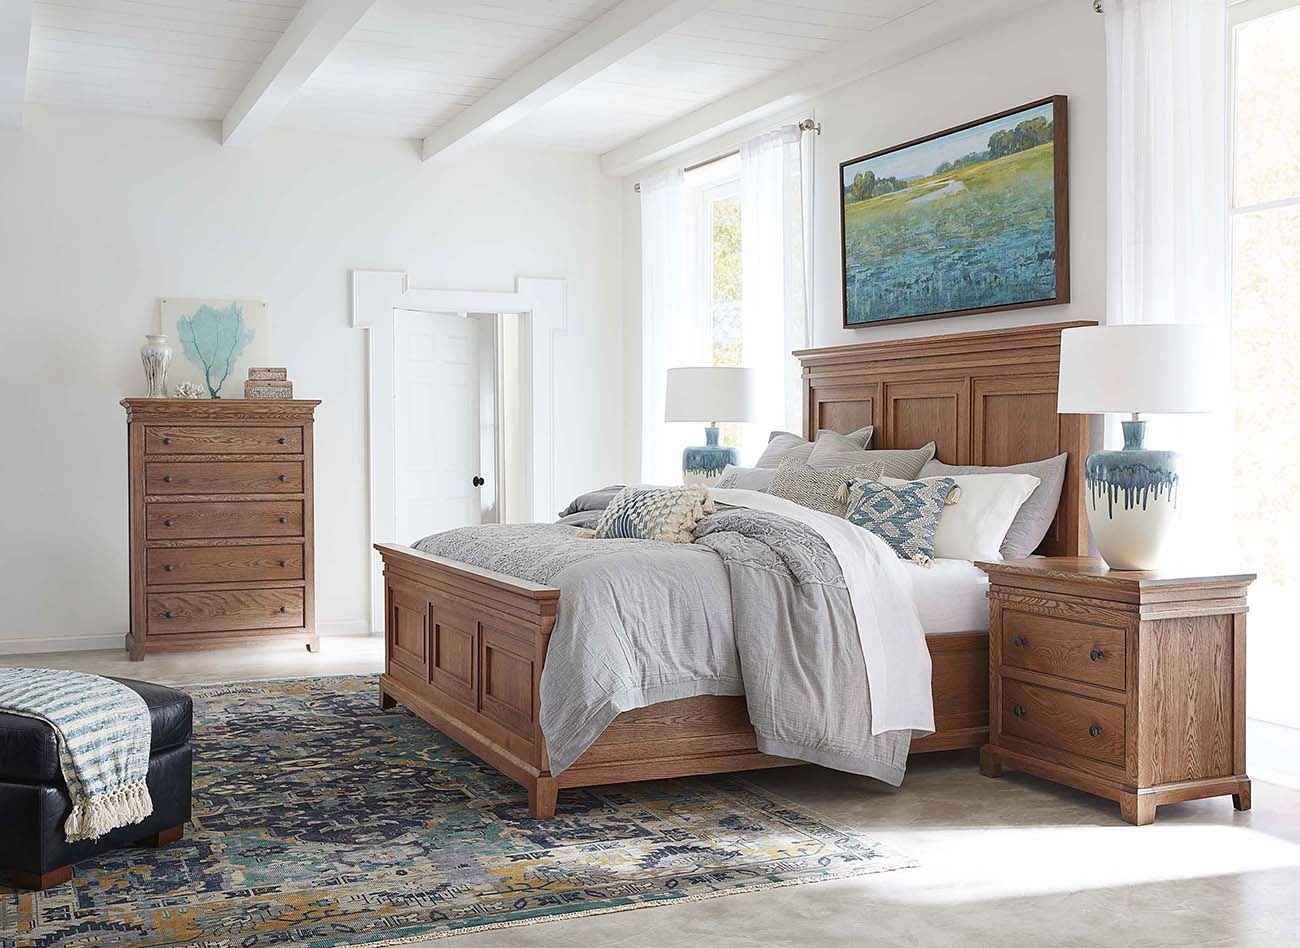 St. Lawrence Bed - Stickley Brand